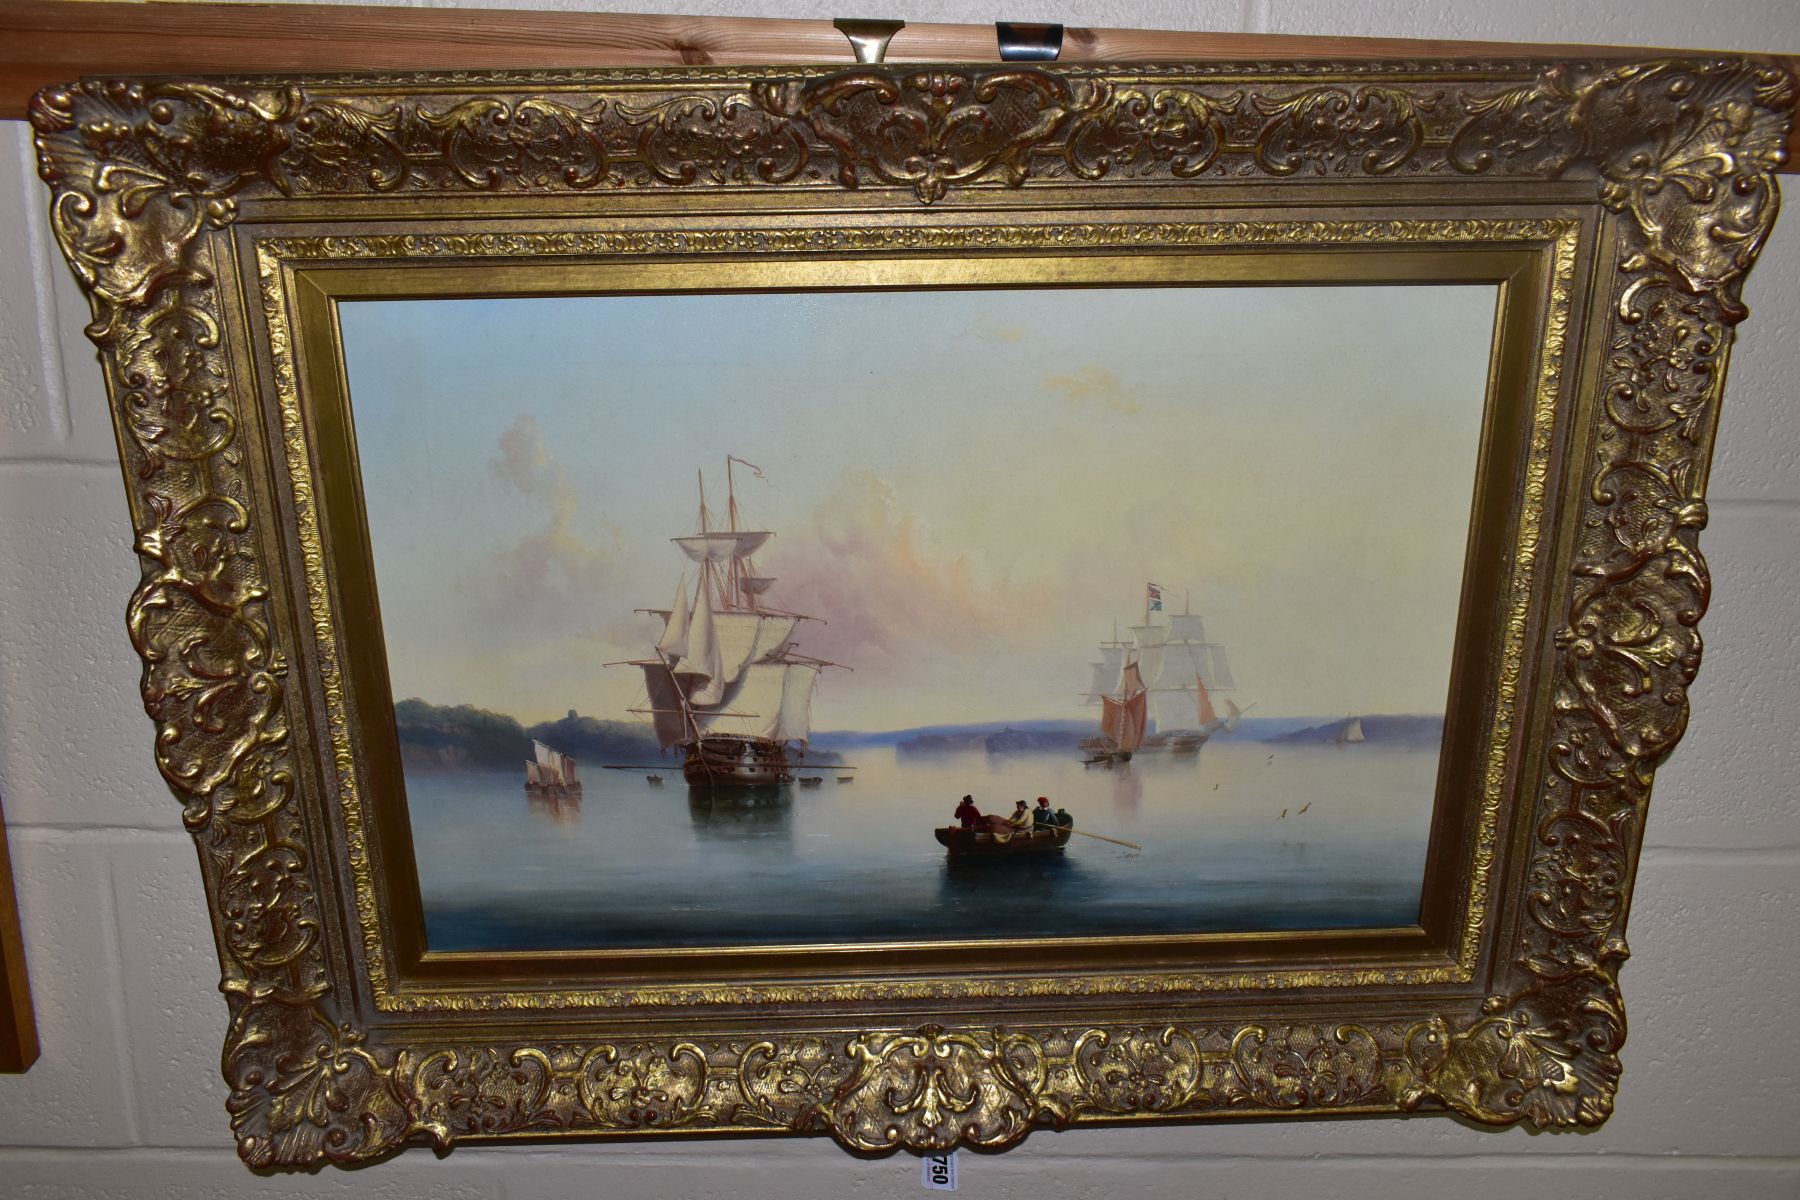 A HISTORIC MARITIME HARBOUR SCENE POSSIBLY PLYMOUTH SOUND, with square rigged gunships and figures